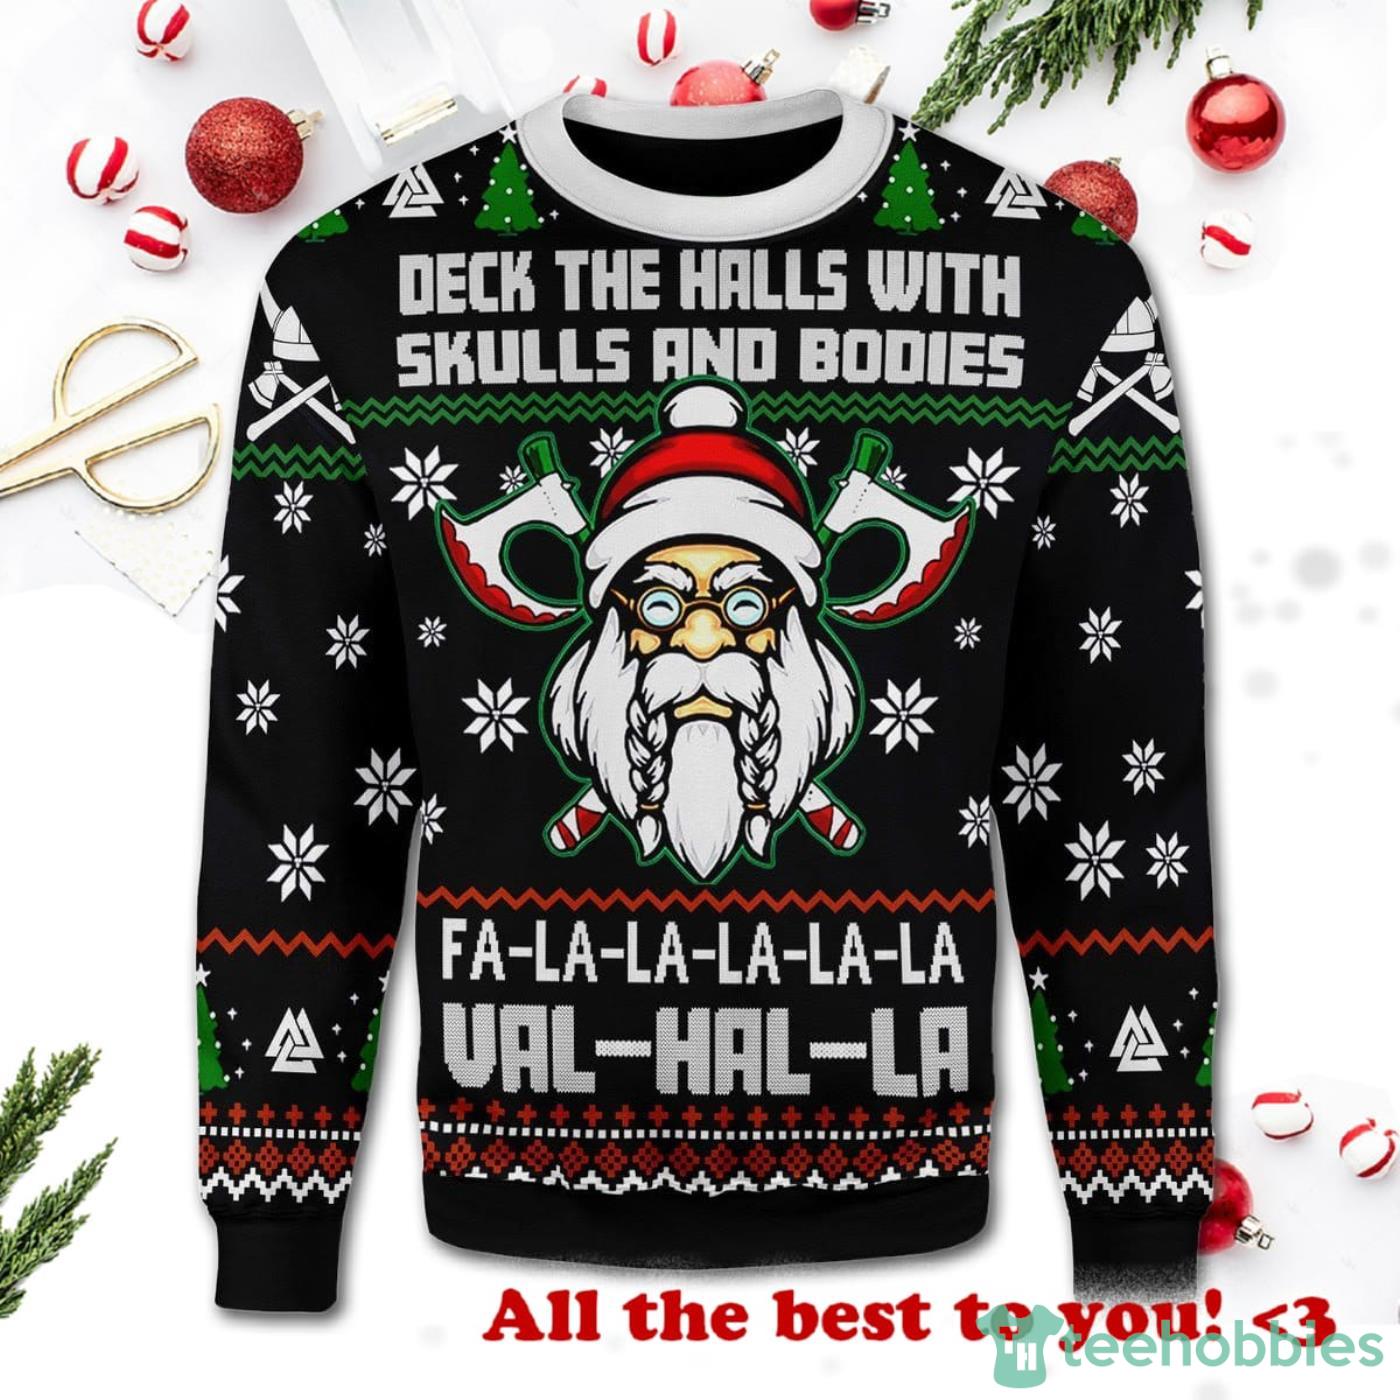 ValHalla Deck The Halls With Skulls And Bodies Christmas Ugly Sweater Product Photo 1